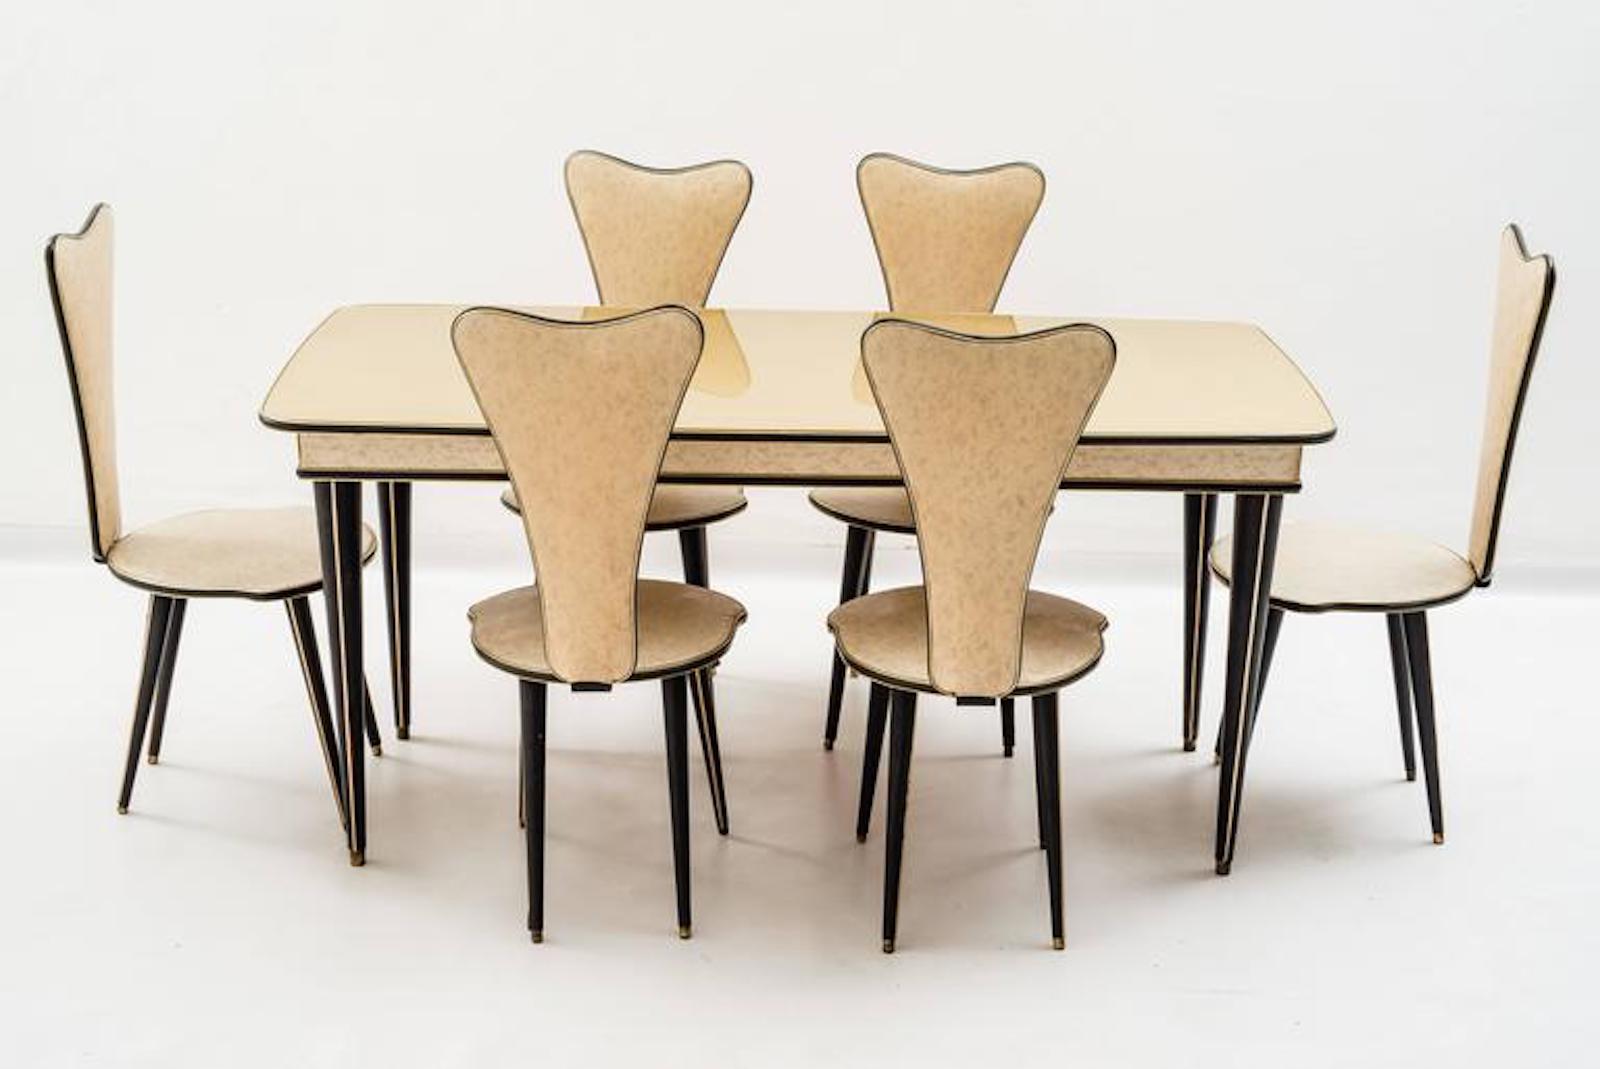 Set of Six Chairs by Umberto Mascagni, 1950s For Sale 2